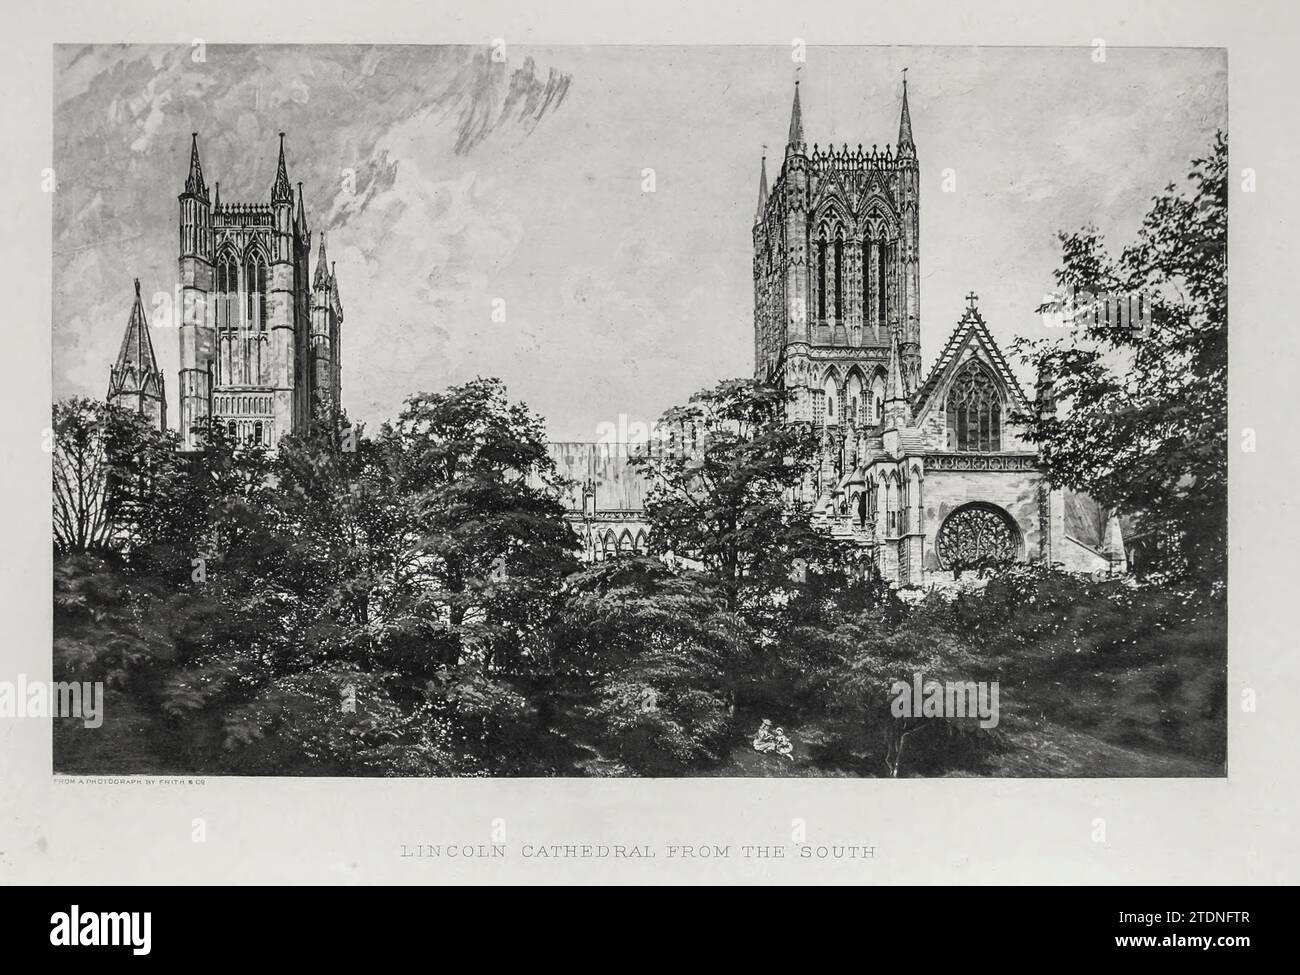 Lincoln Cathedral from the South aus dem Buch Cathedrals, Abbeys and Church of England and Wales: Deskriptive, Historical, Pictorial Volume 1 von Bonney, T. G. (Thomas George), 1833–1923; Publisher London: Cassell 1890 Stockfoto